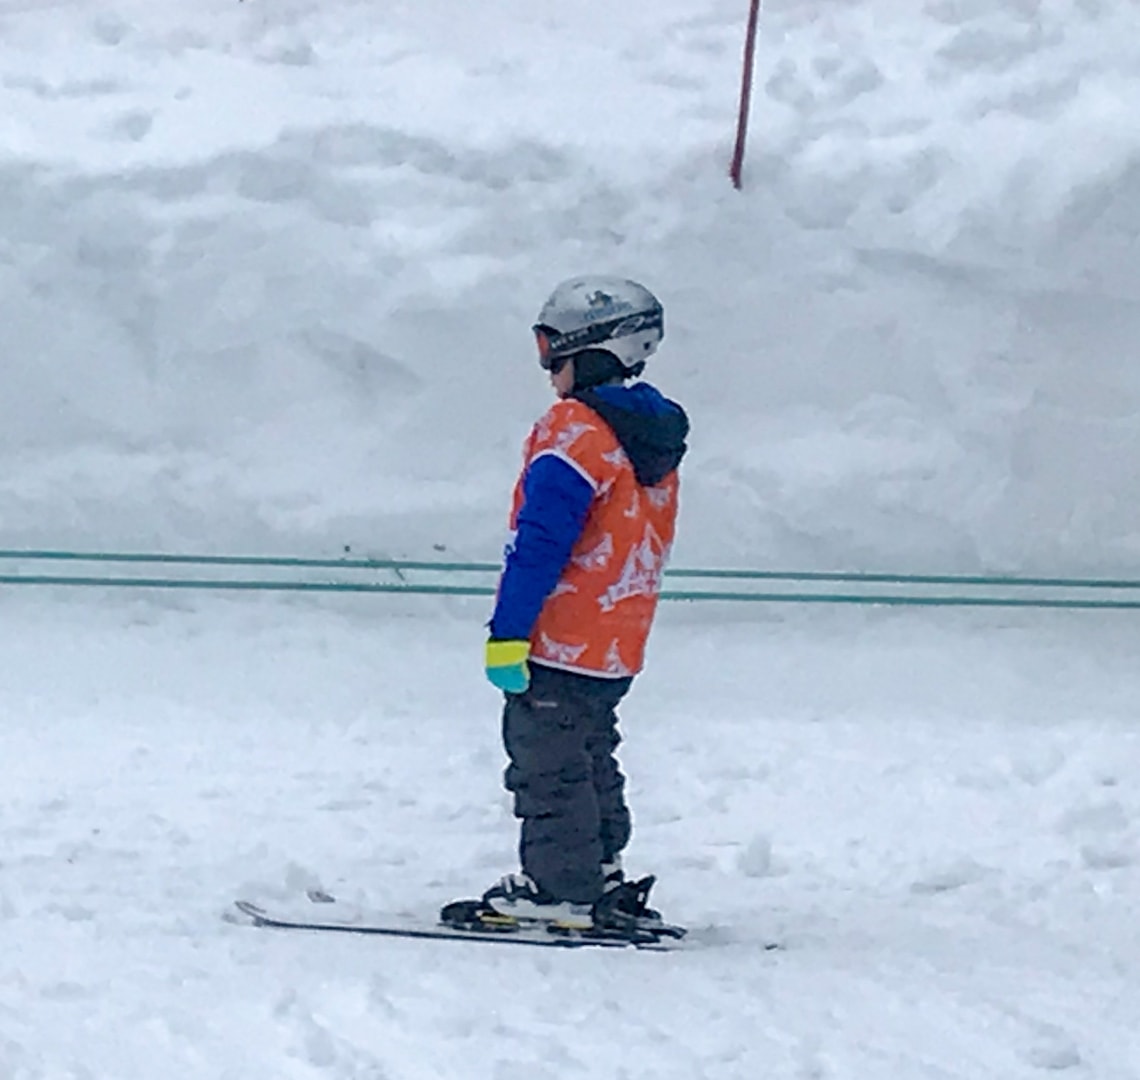 Lessons from travelling with kids - Thing 1 on a ski drag lift